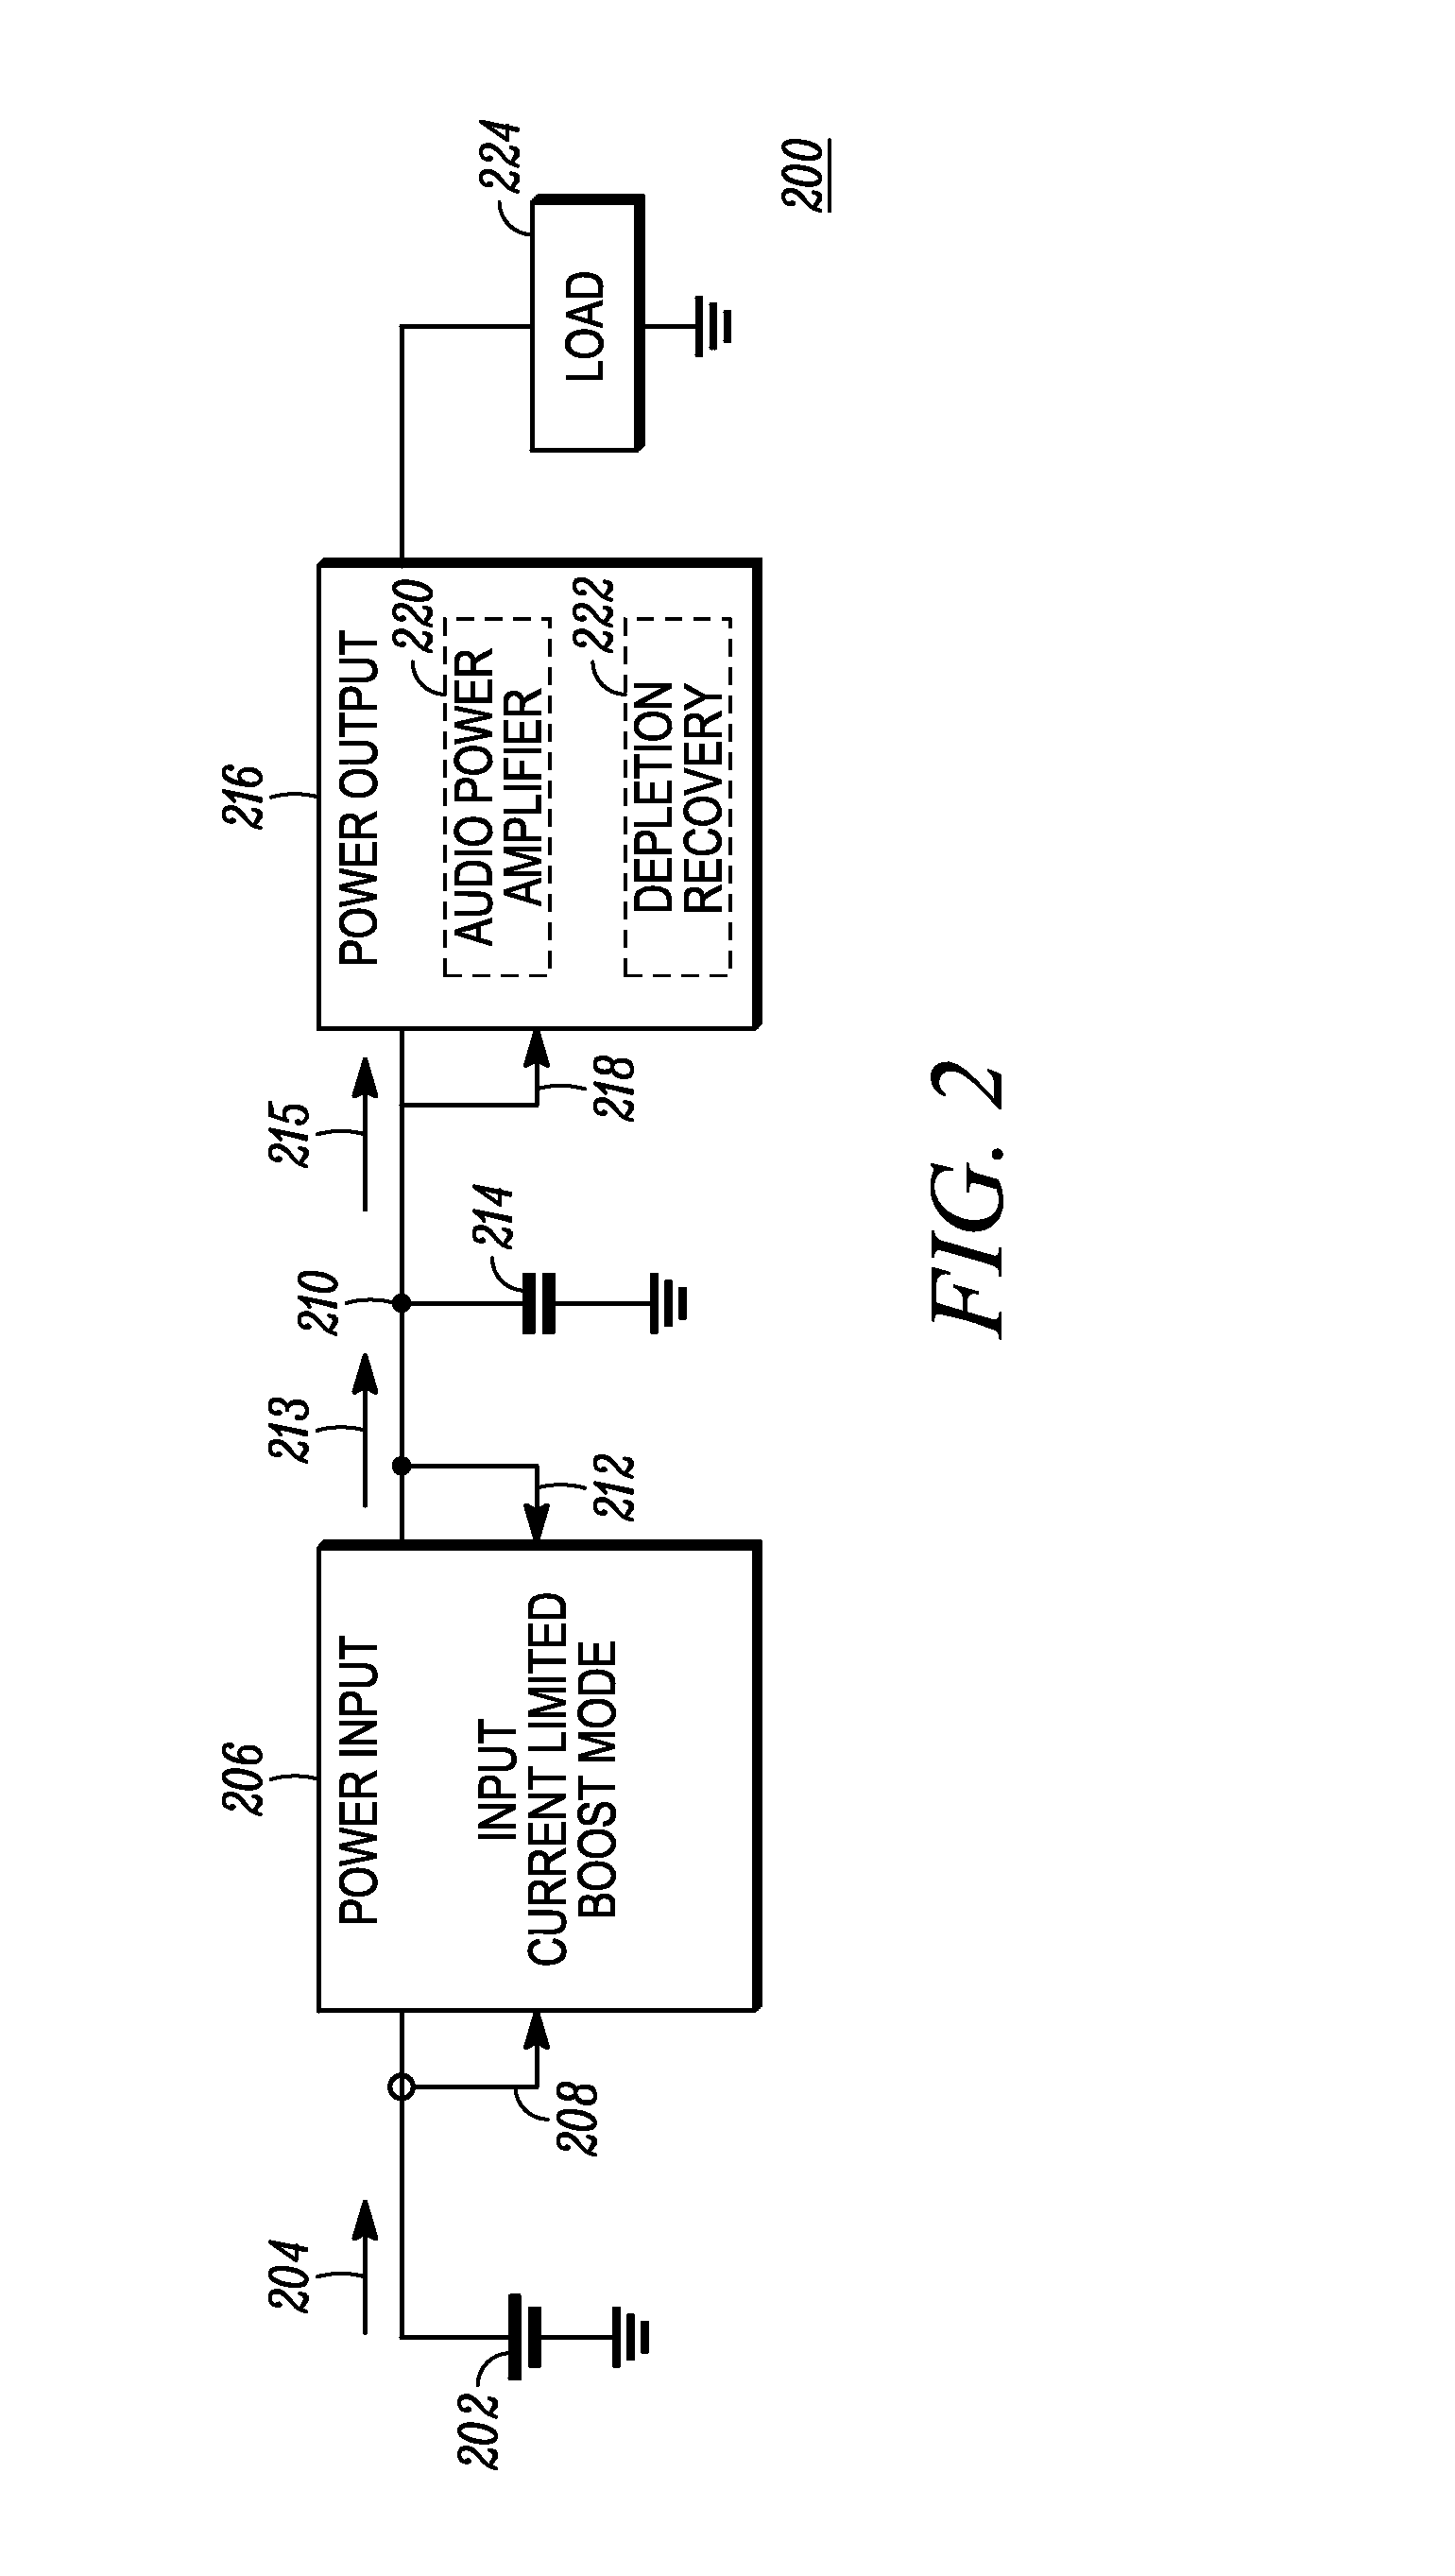 Input current limited power supply and audio power amplifier for high power reproduction of nondeterministic signals